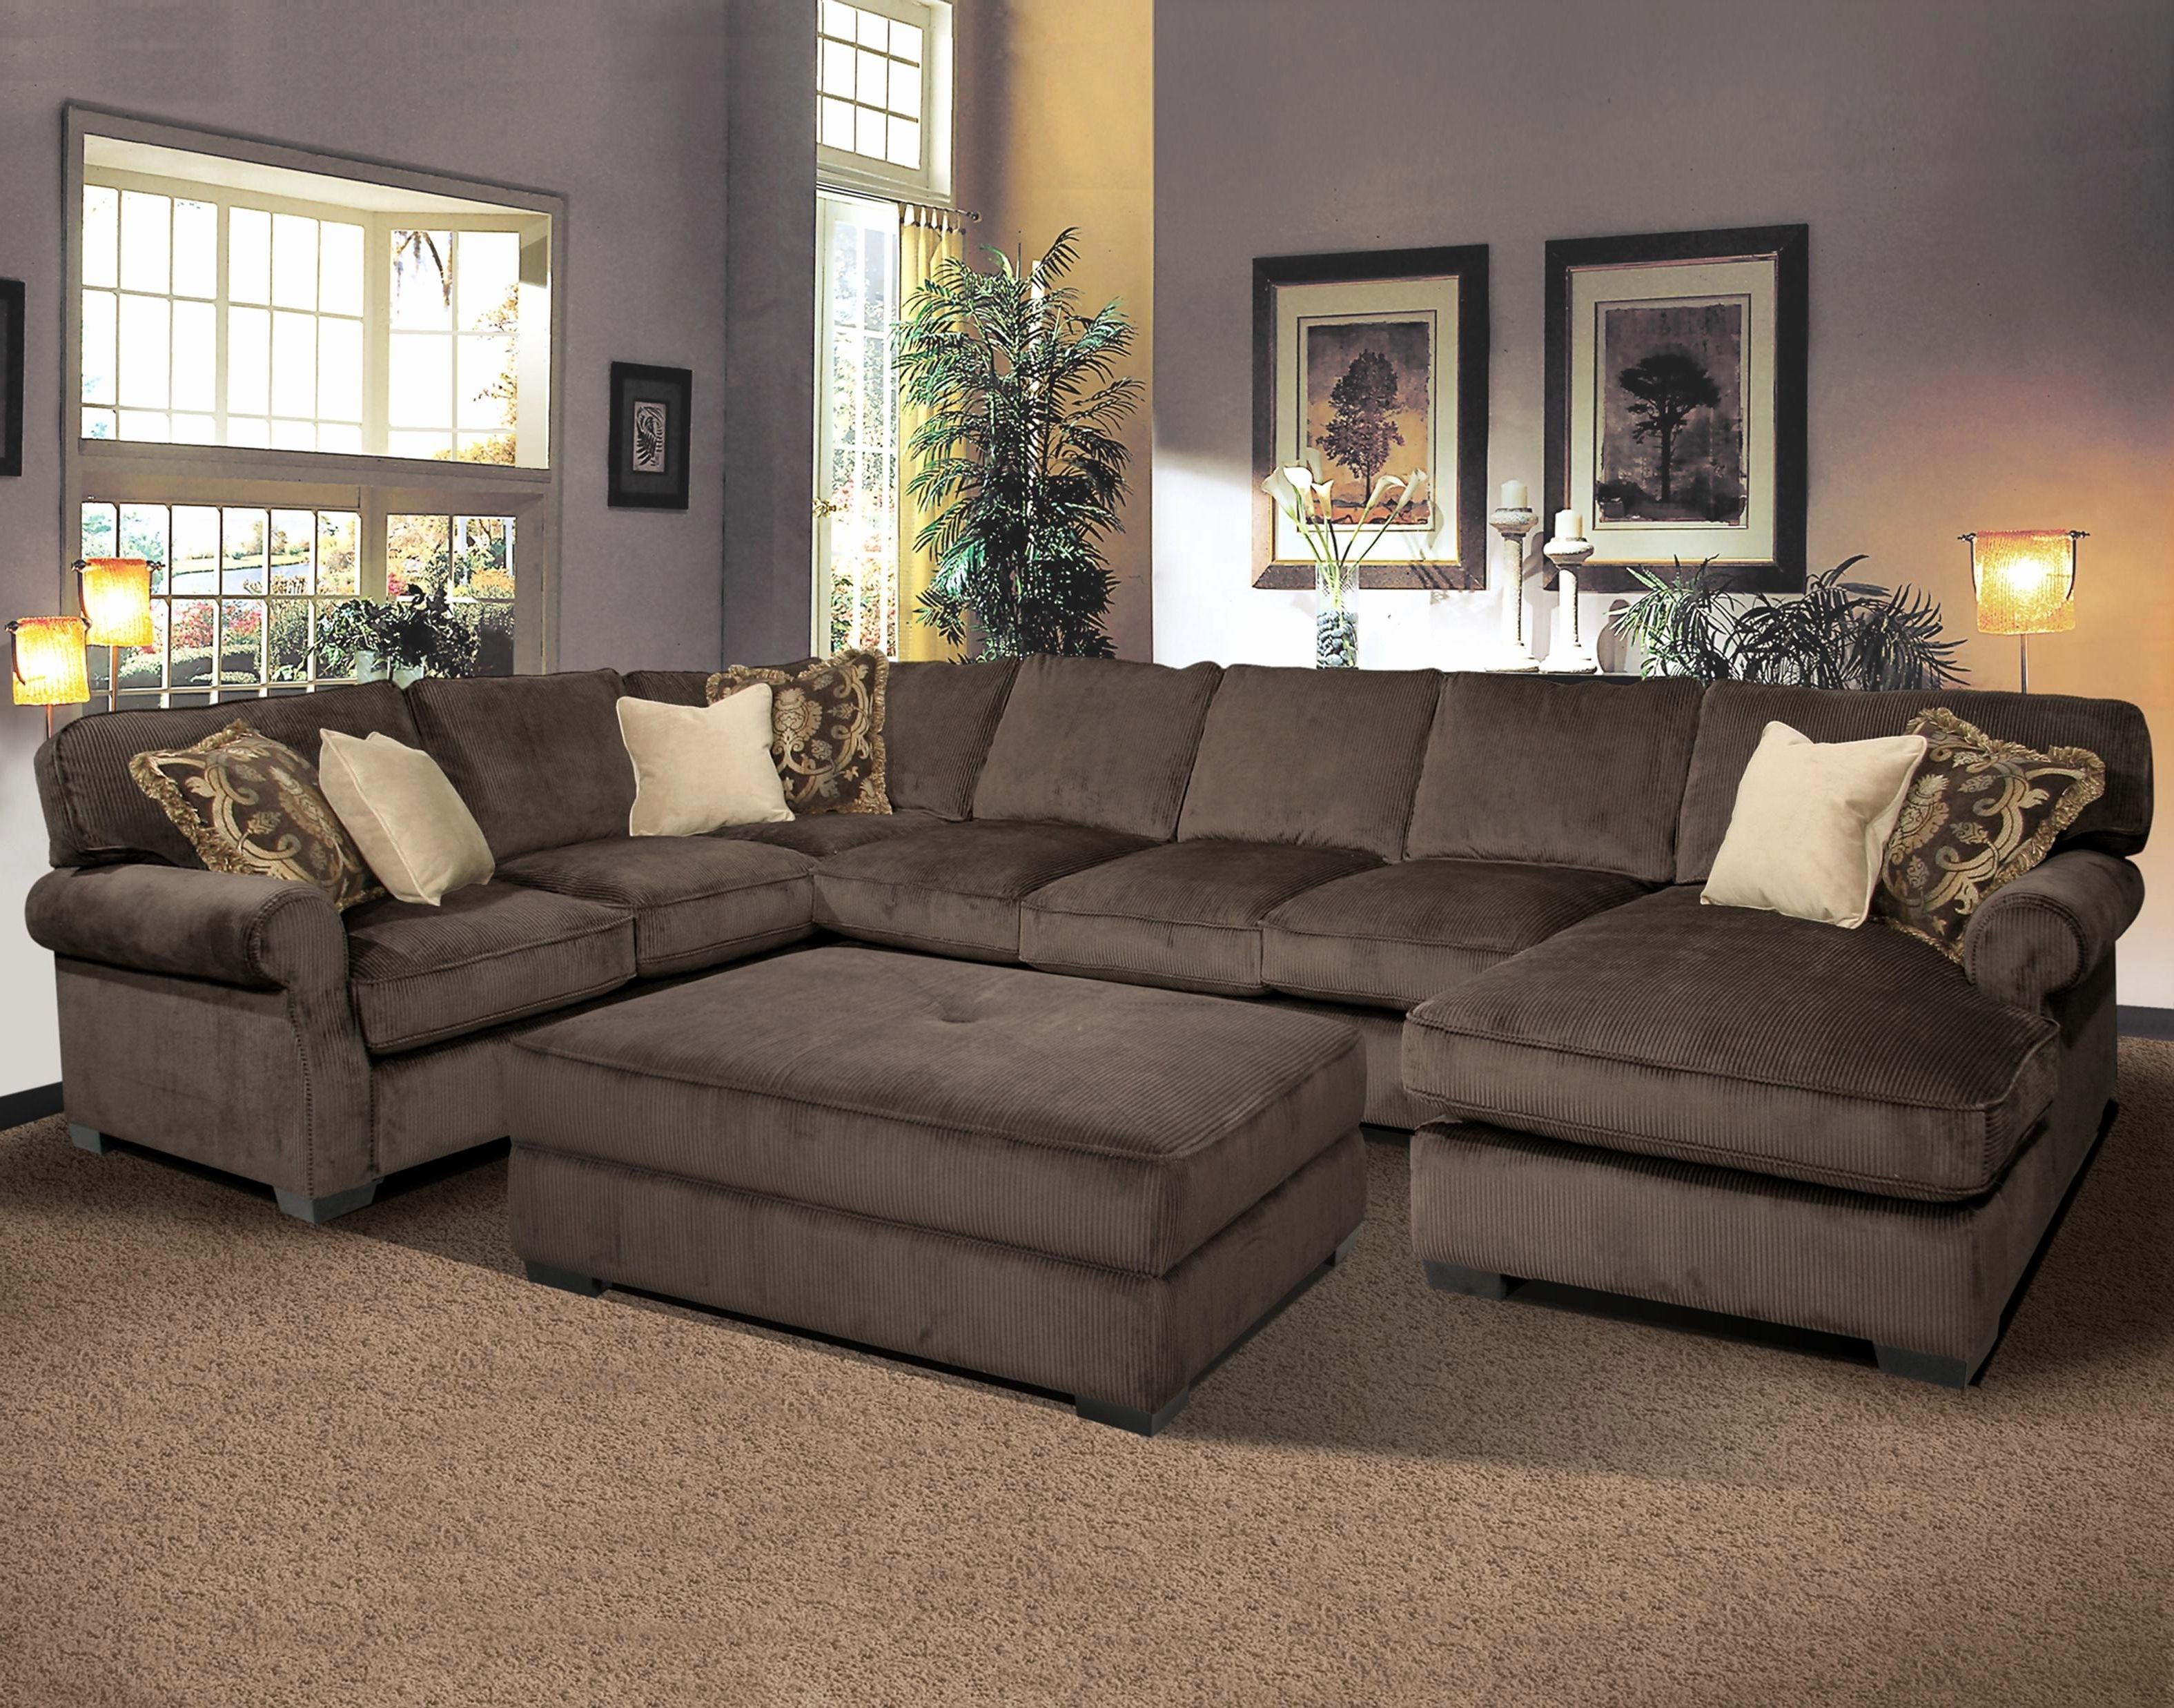 Featured Photo of 15 Best Collection of Deep Sectional Sofas with Chaise